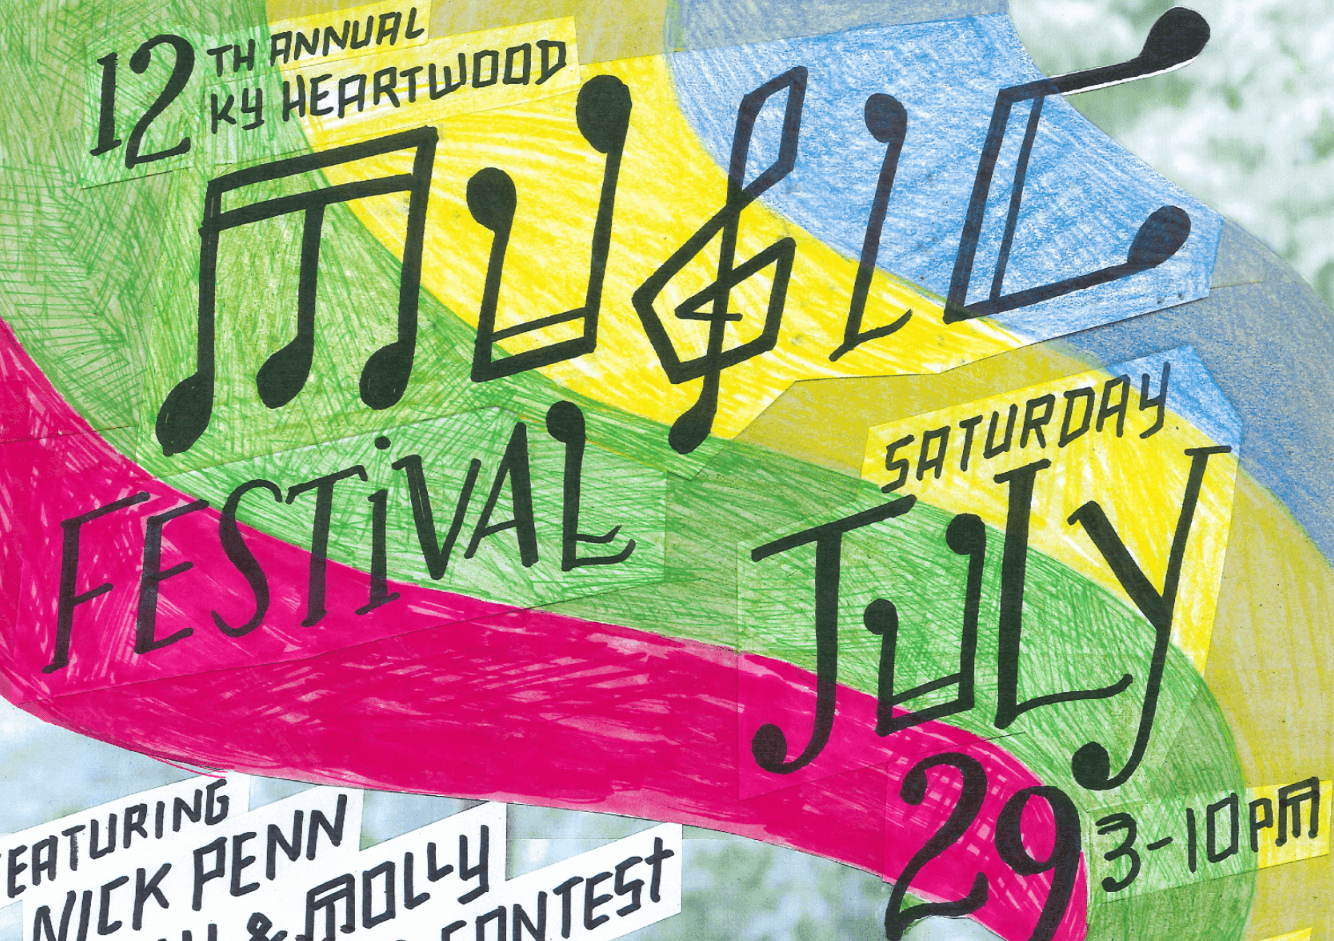 Additions to 12th Annual All Good Music Festival